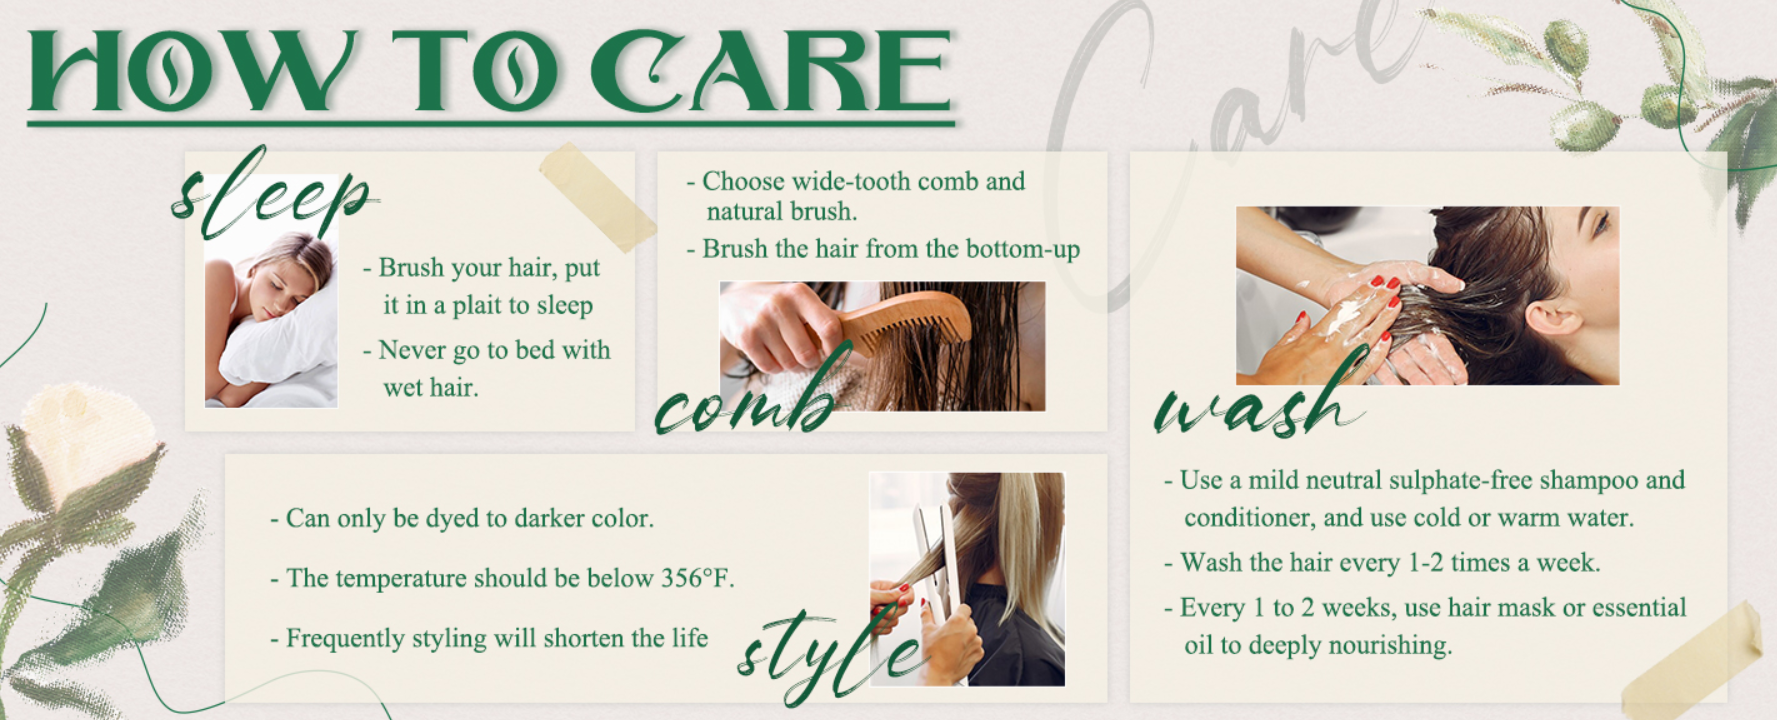 how to care about hair weft